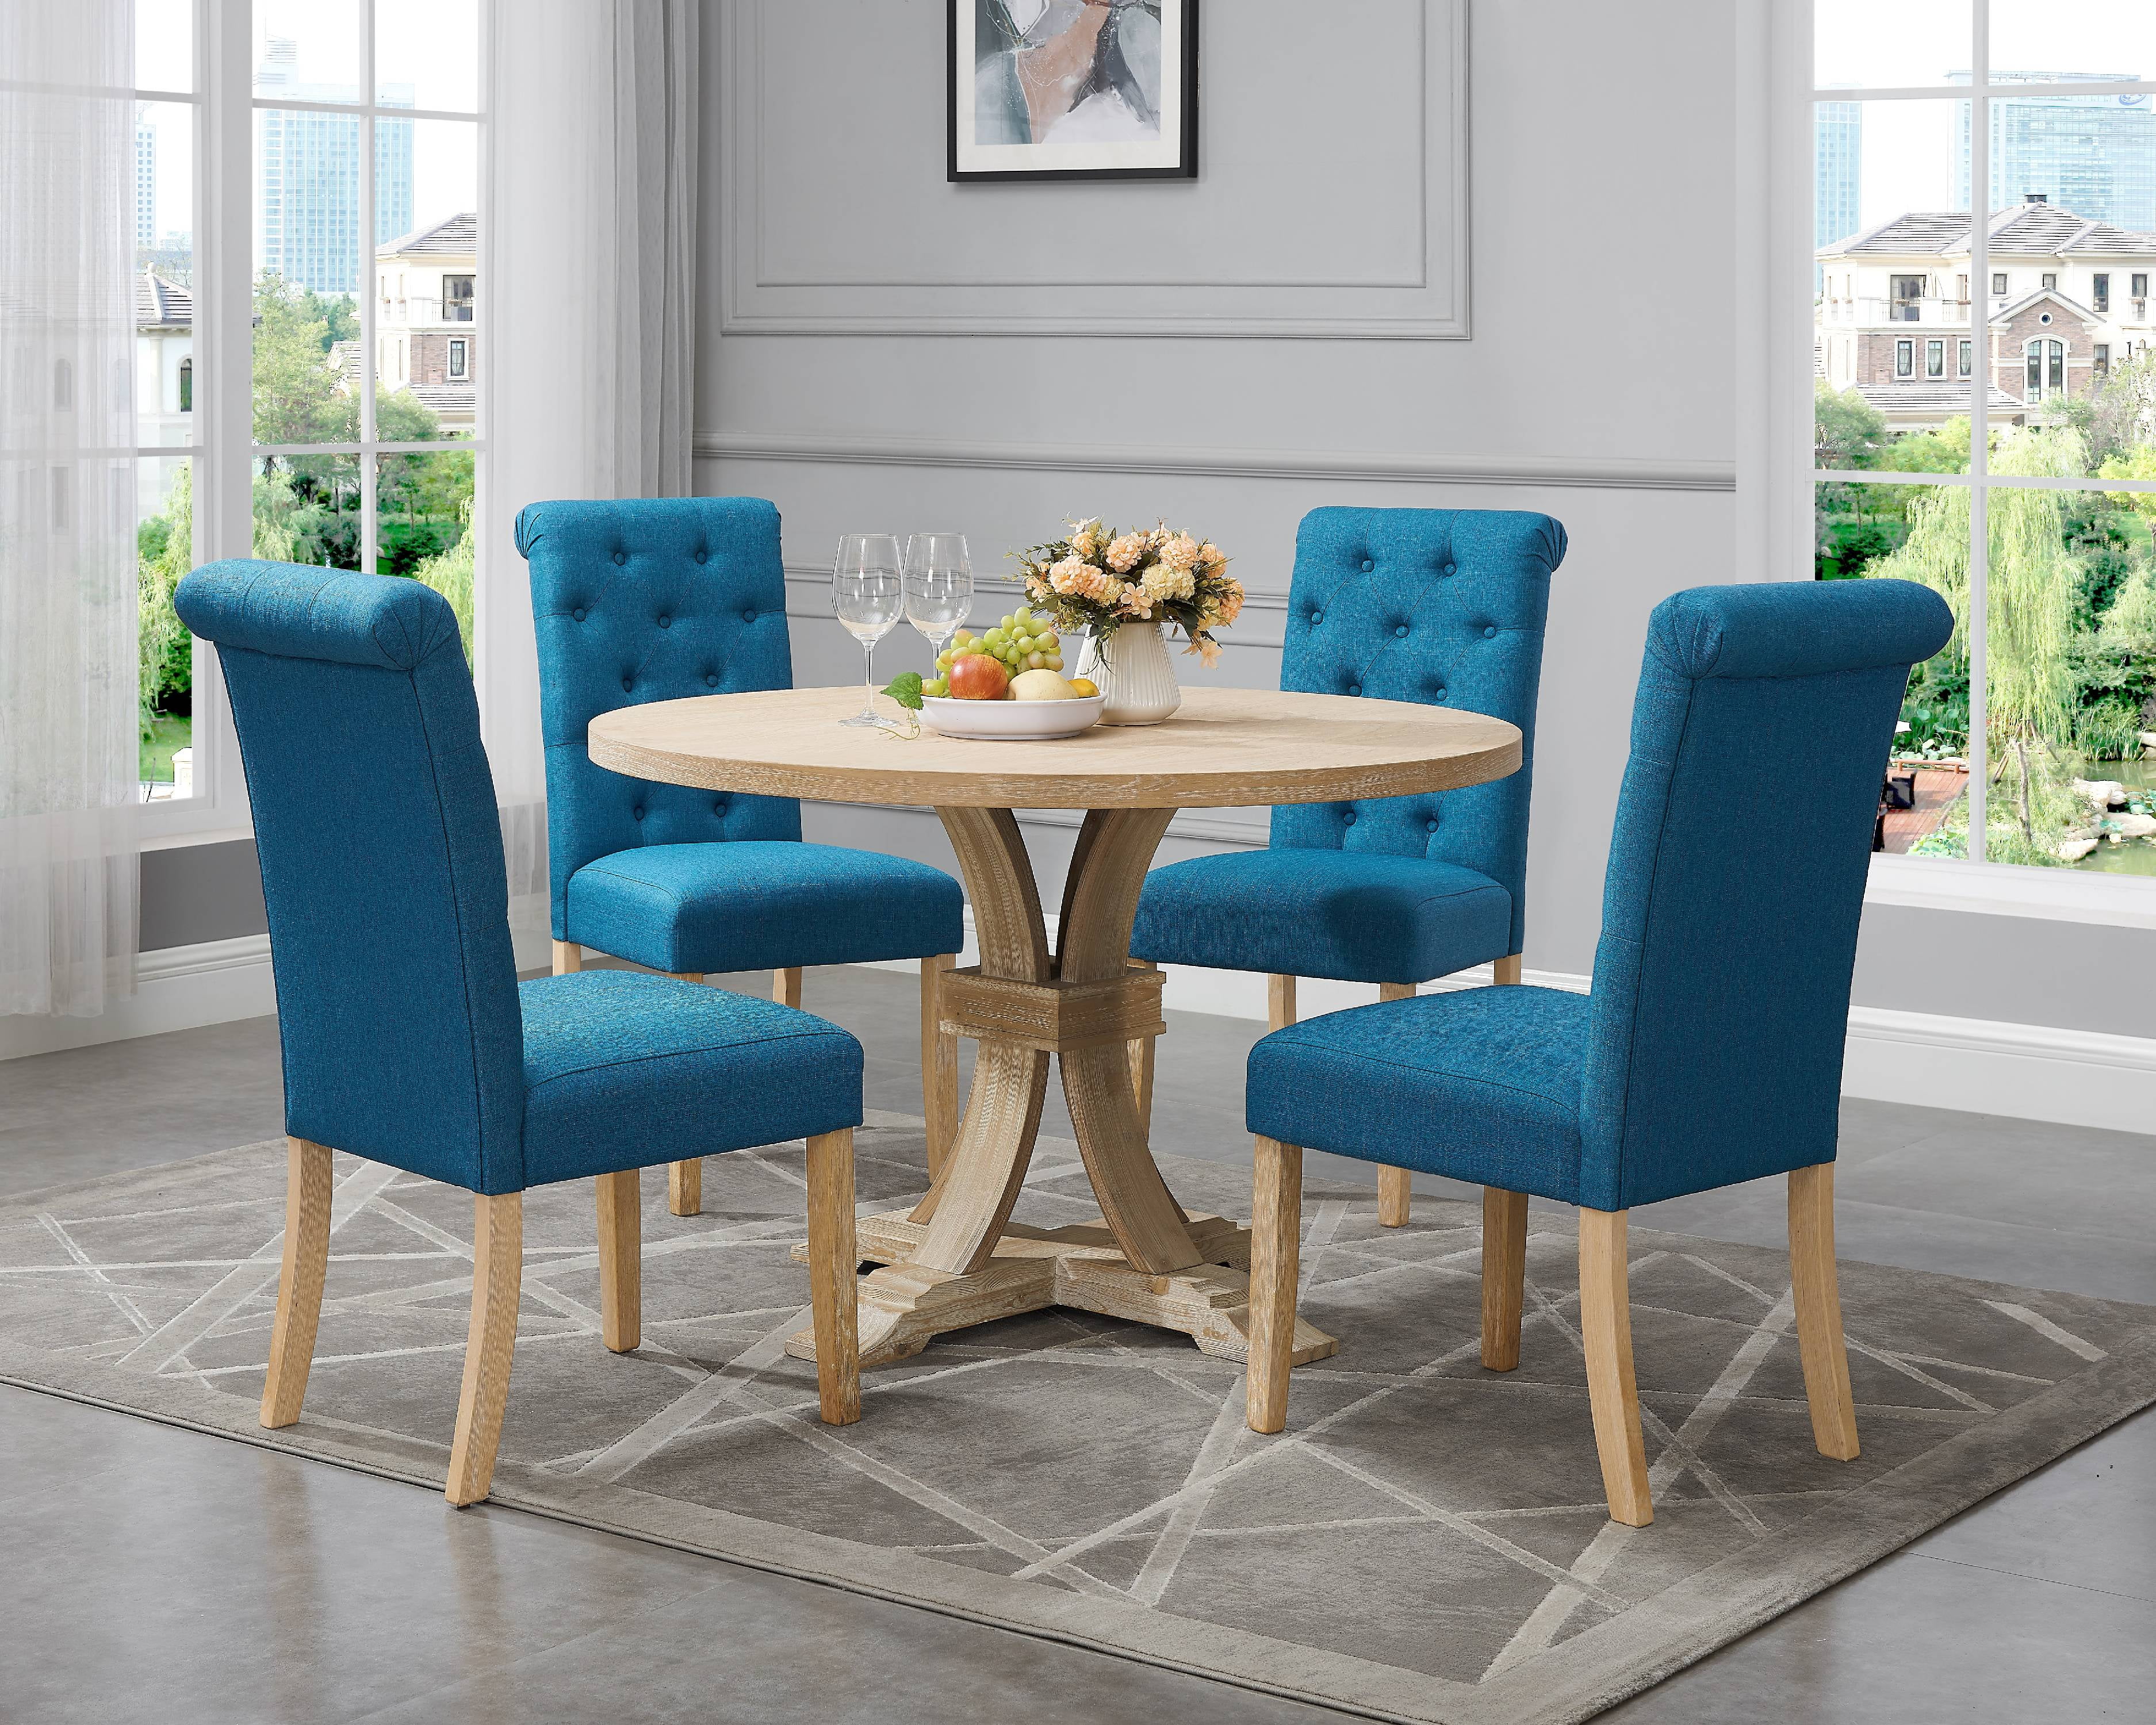 Teal Dining Chairs: The Trend Your Dining Room Needs